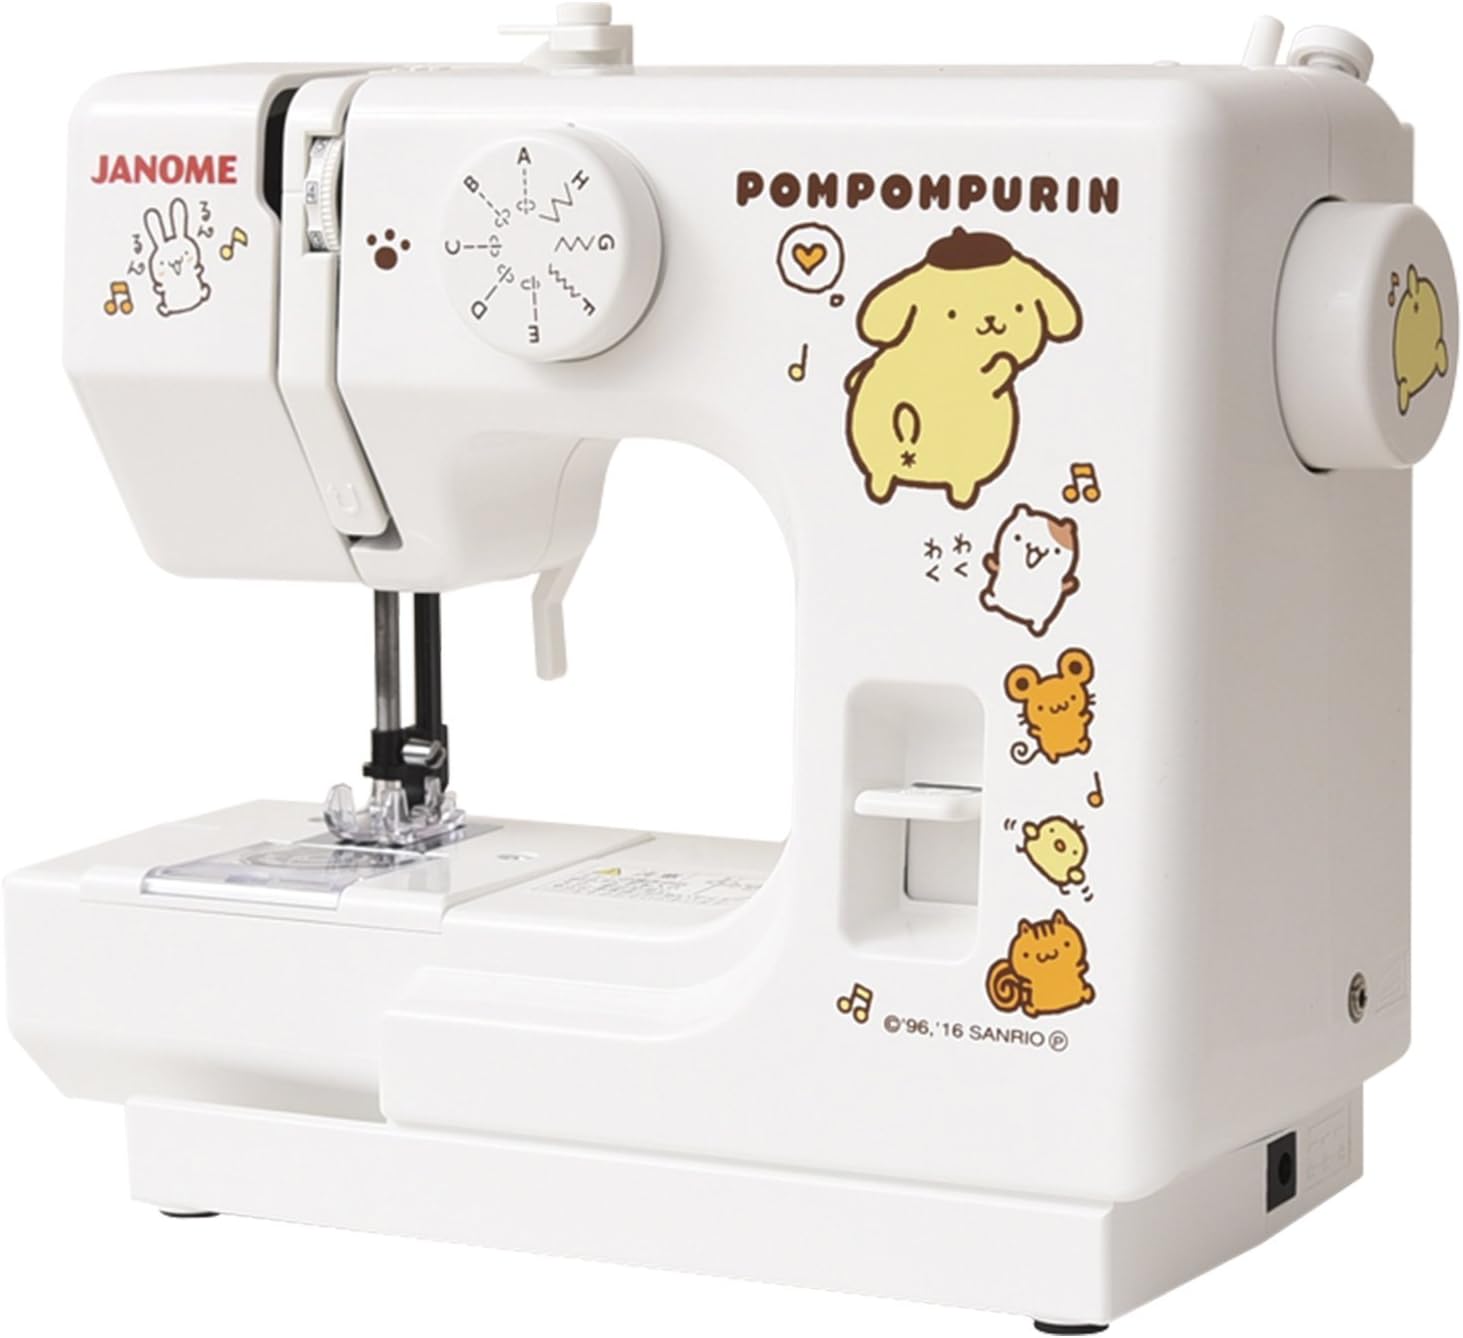 Electric Sewing Machine Hello Kitty / Pompompurin - imy Shop Japan